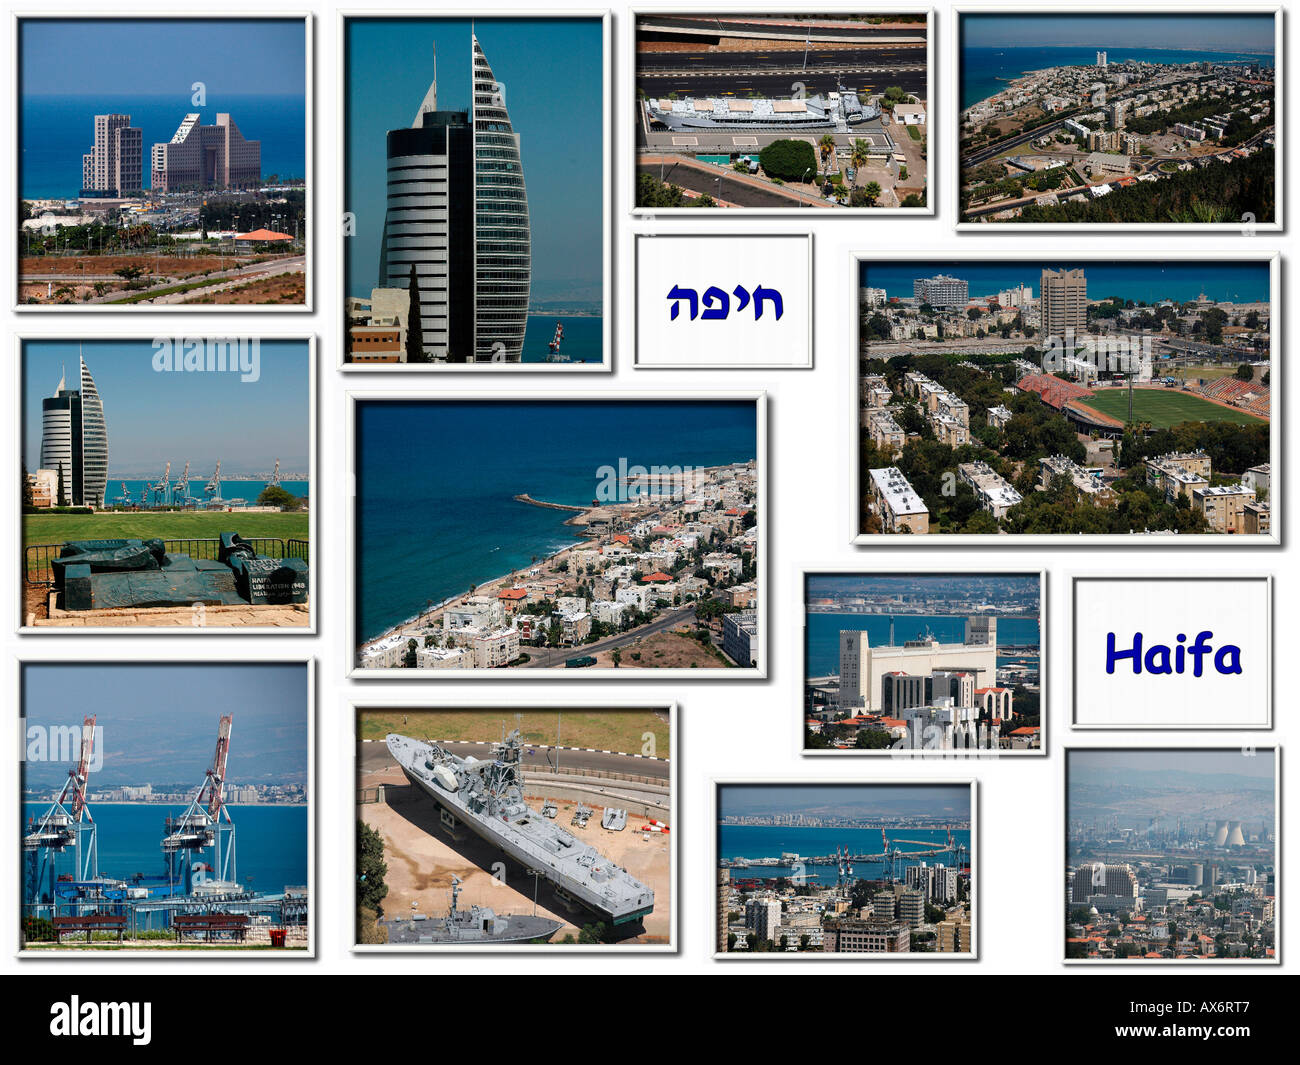 A collage of images from Haifa Israel Stock Photo